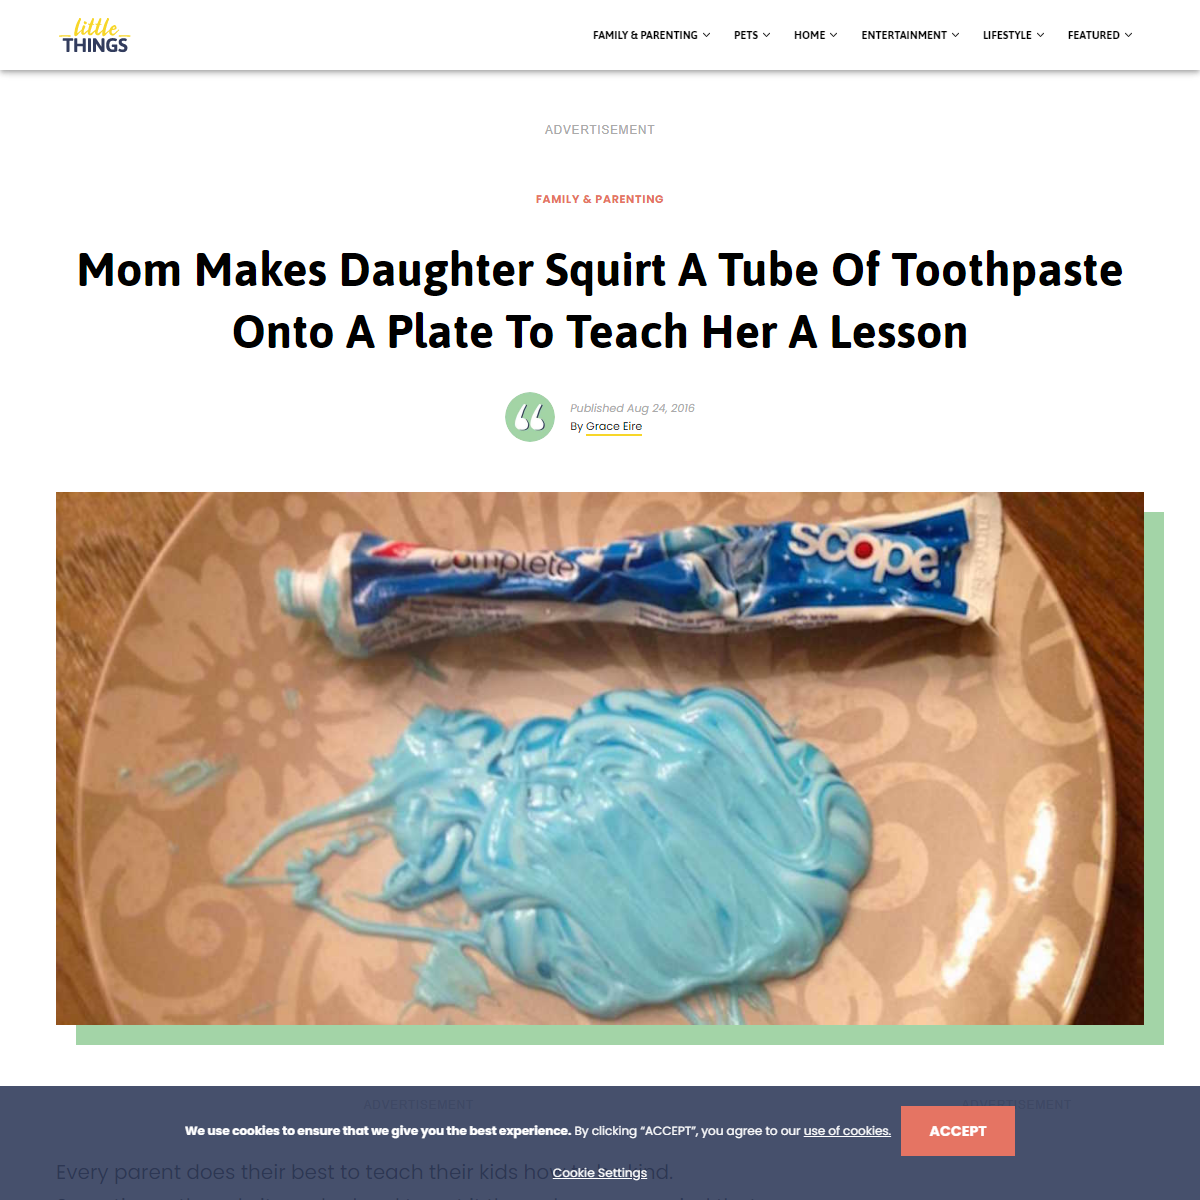 Mom Makes Daughter Squirt A Tube Of Toothpaste Onto A Plate To Teach Her A Lesson - LittleThings.com